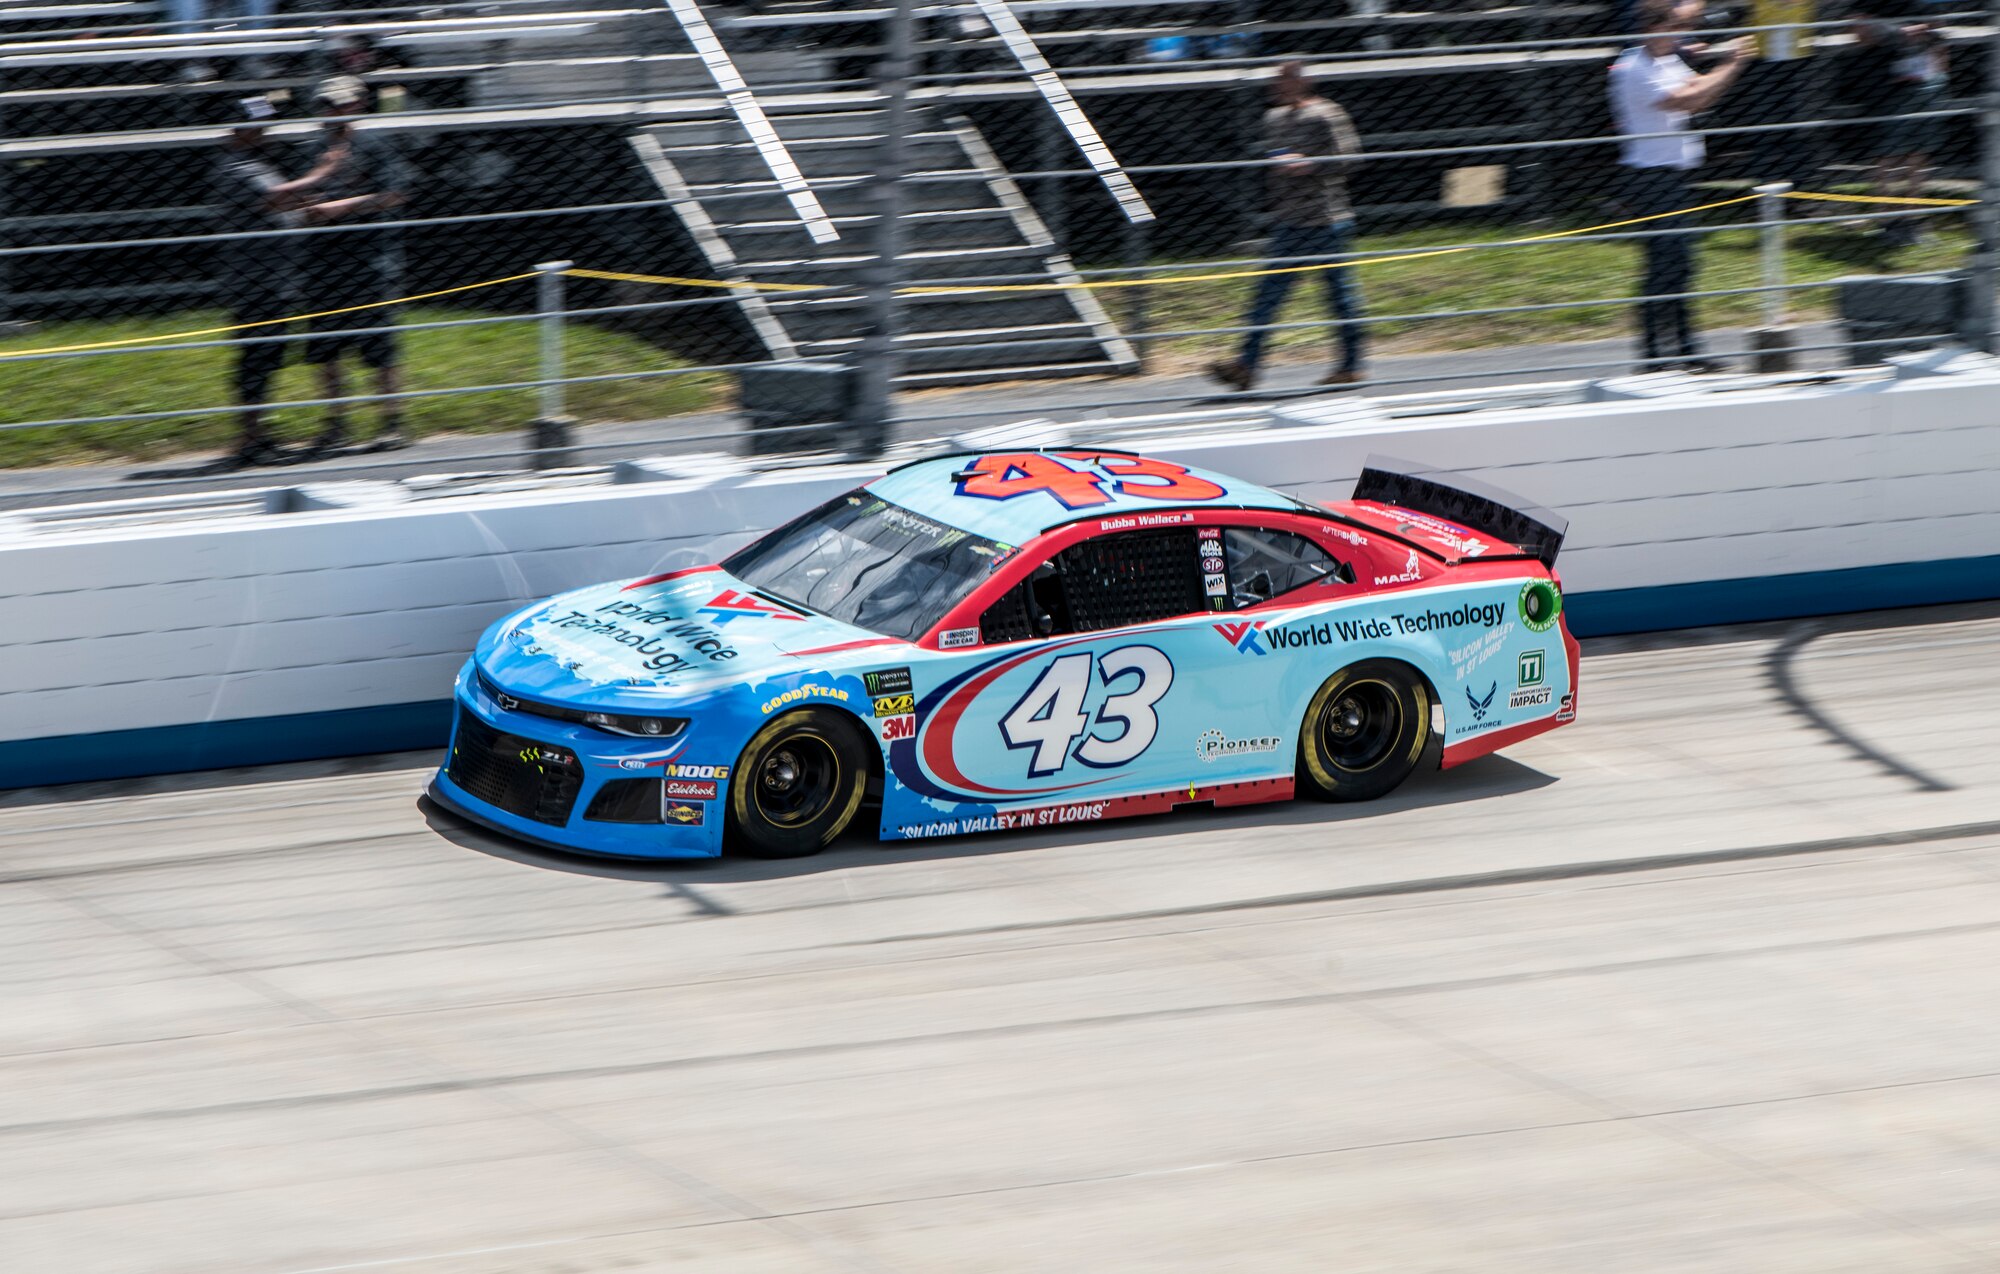 Darrell "Bubba" Wallace Jr., NASCAR Sprint Cup Series driver of the No. 43 Chevrolet, races during the Gander RV 400 Monster Energy NASCAR Cup Series race May 6, 2018, at Dover International Speedway, Dover, Del. The U.S. Air Force is one of the many sponsors of the No. 43 car. (U.S. Air Force photo by Senior Airman Christopher Quail)